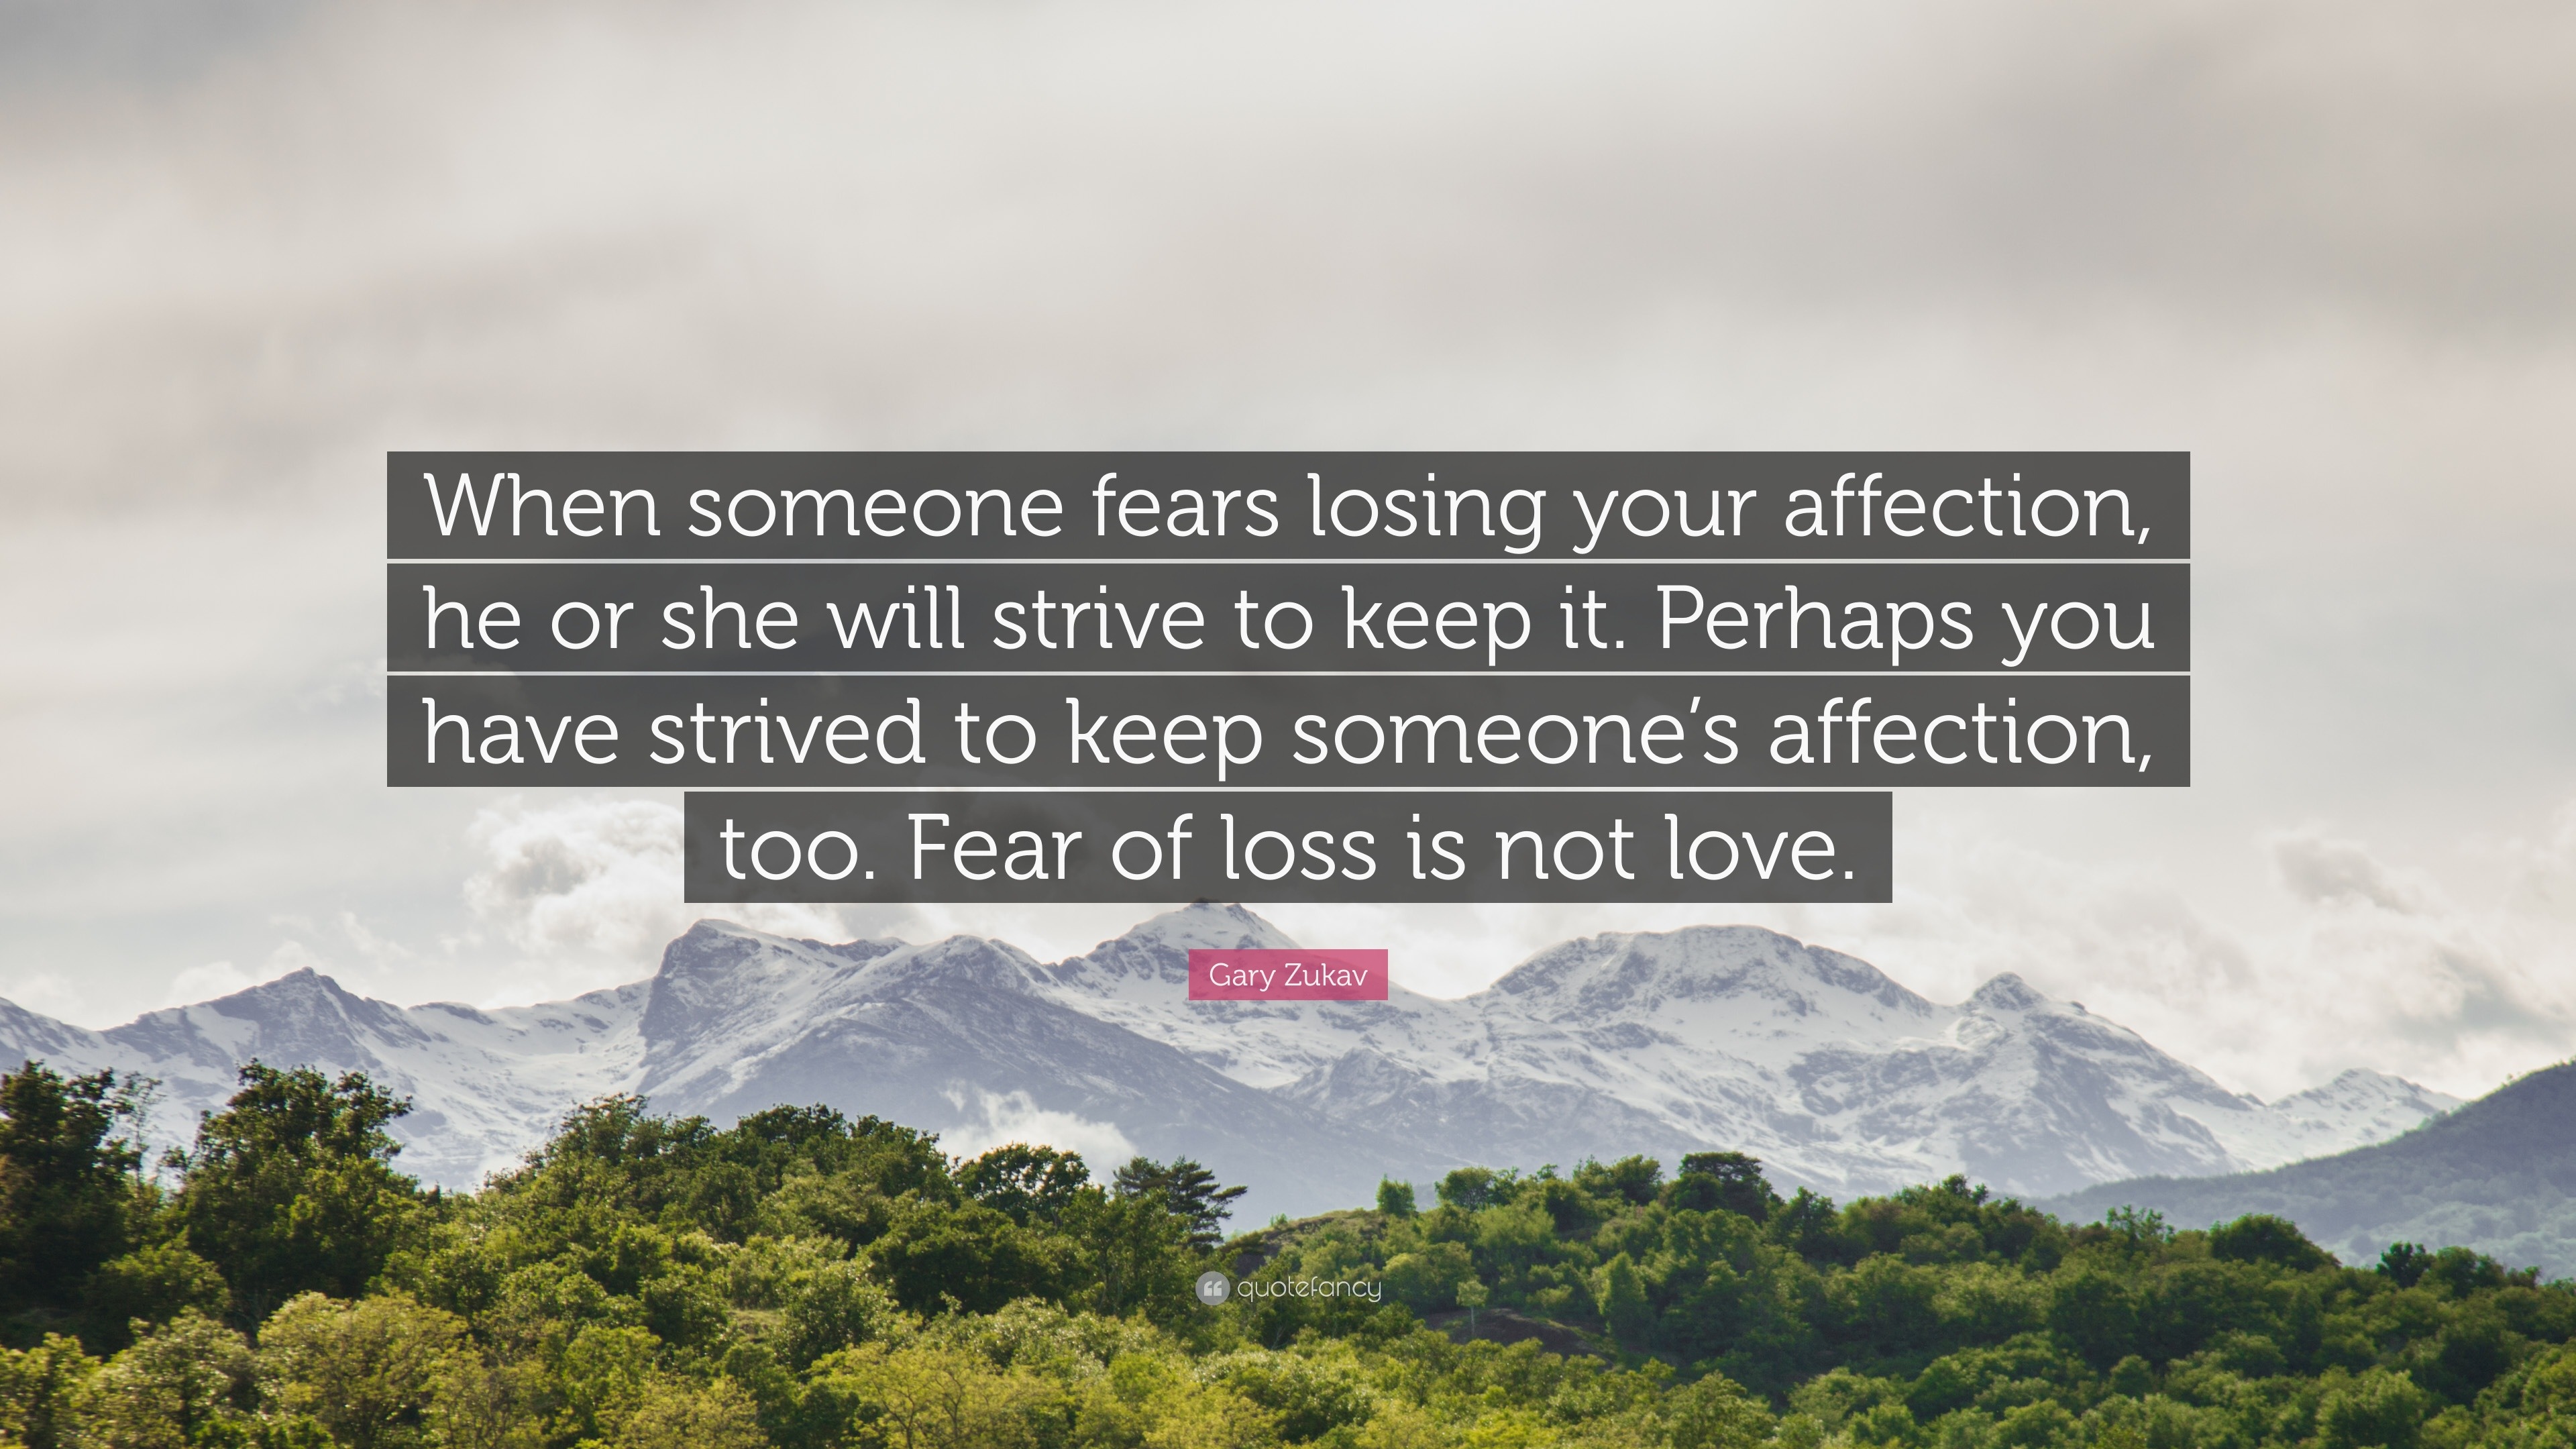 Gary Zukav Quote “When someone fears losing your affection he or she will